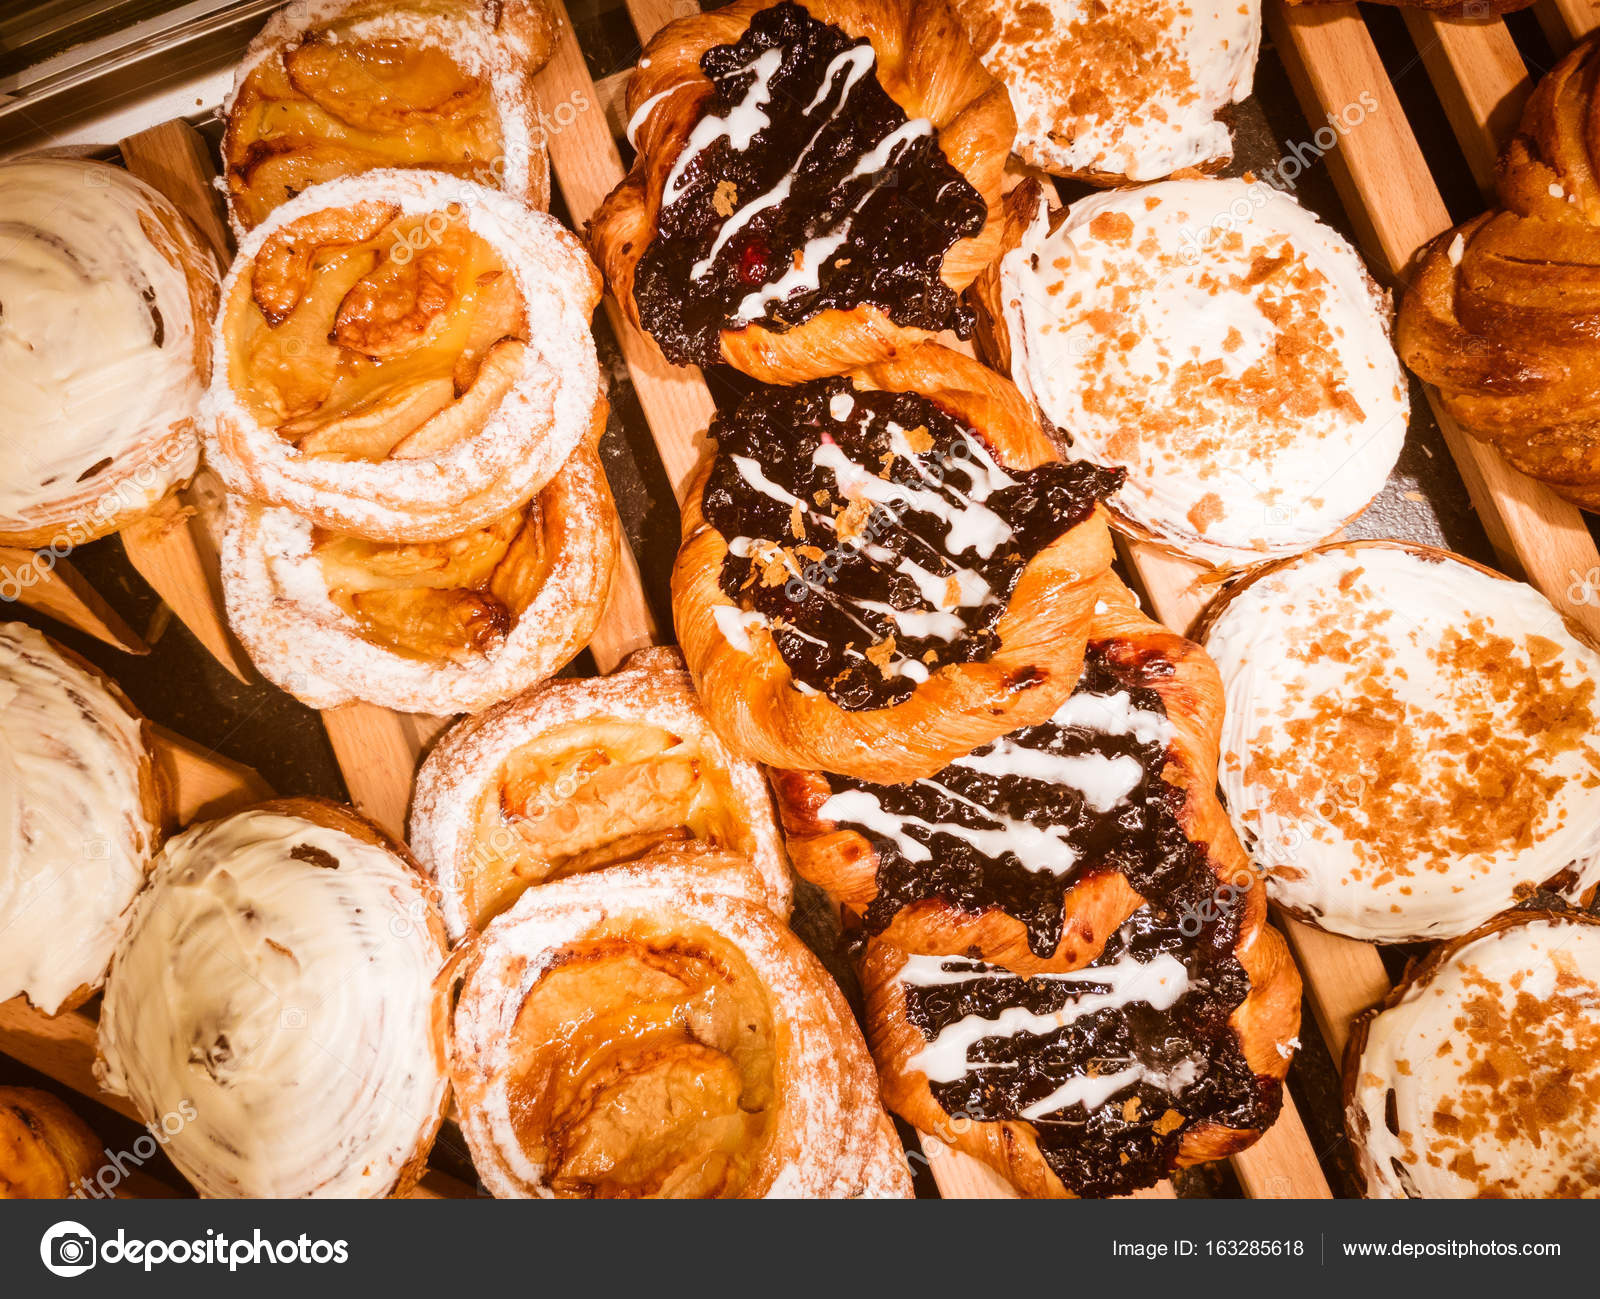 Fresh pastries for sale in the bakery — Stock Photo © toxawww #163285618